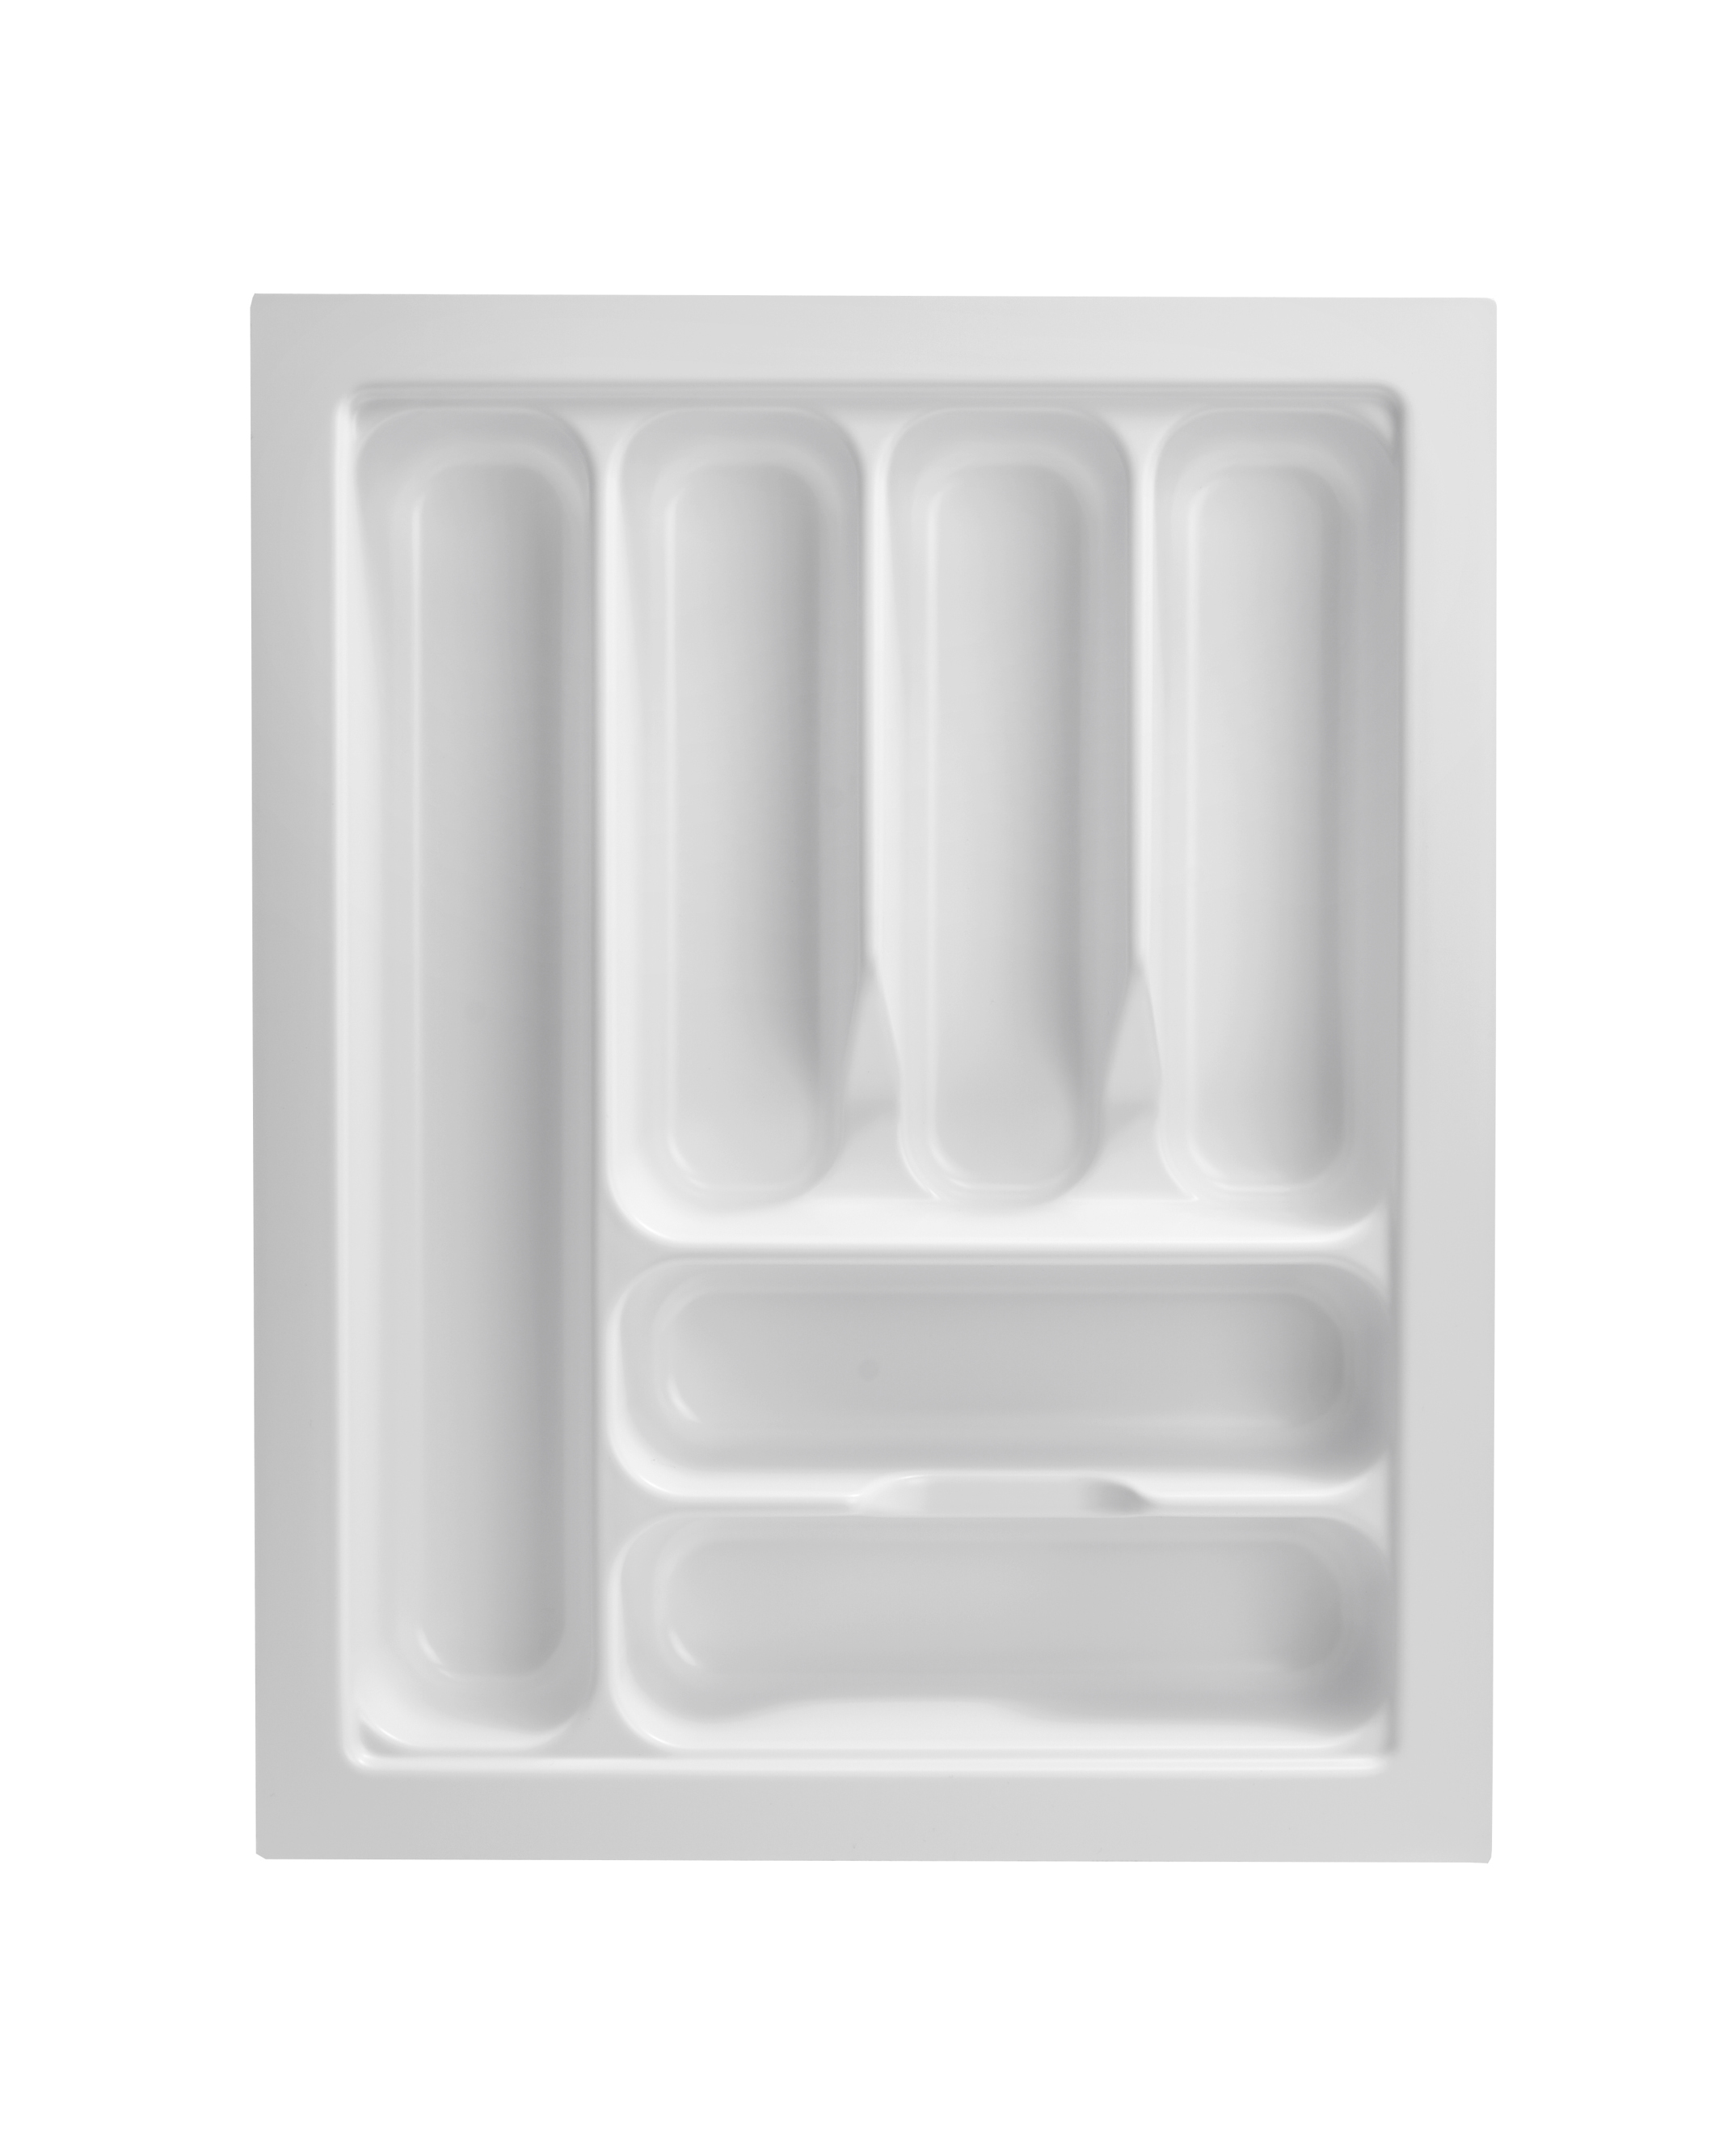 Cutlery tray for cabinet_450mm